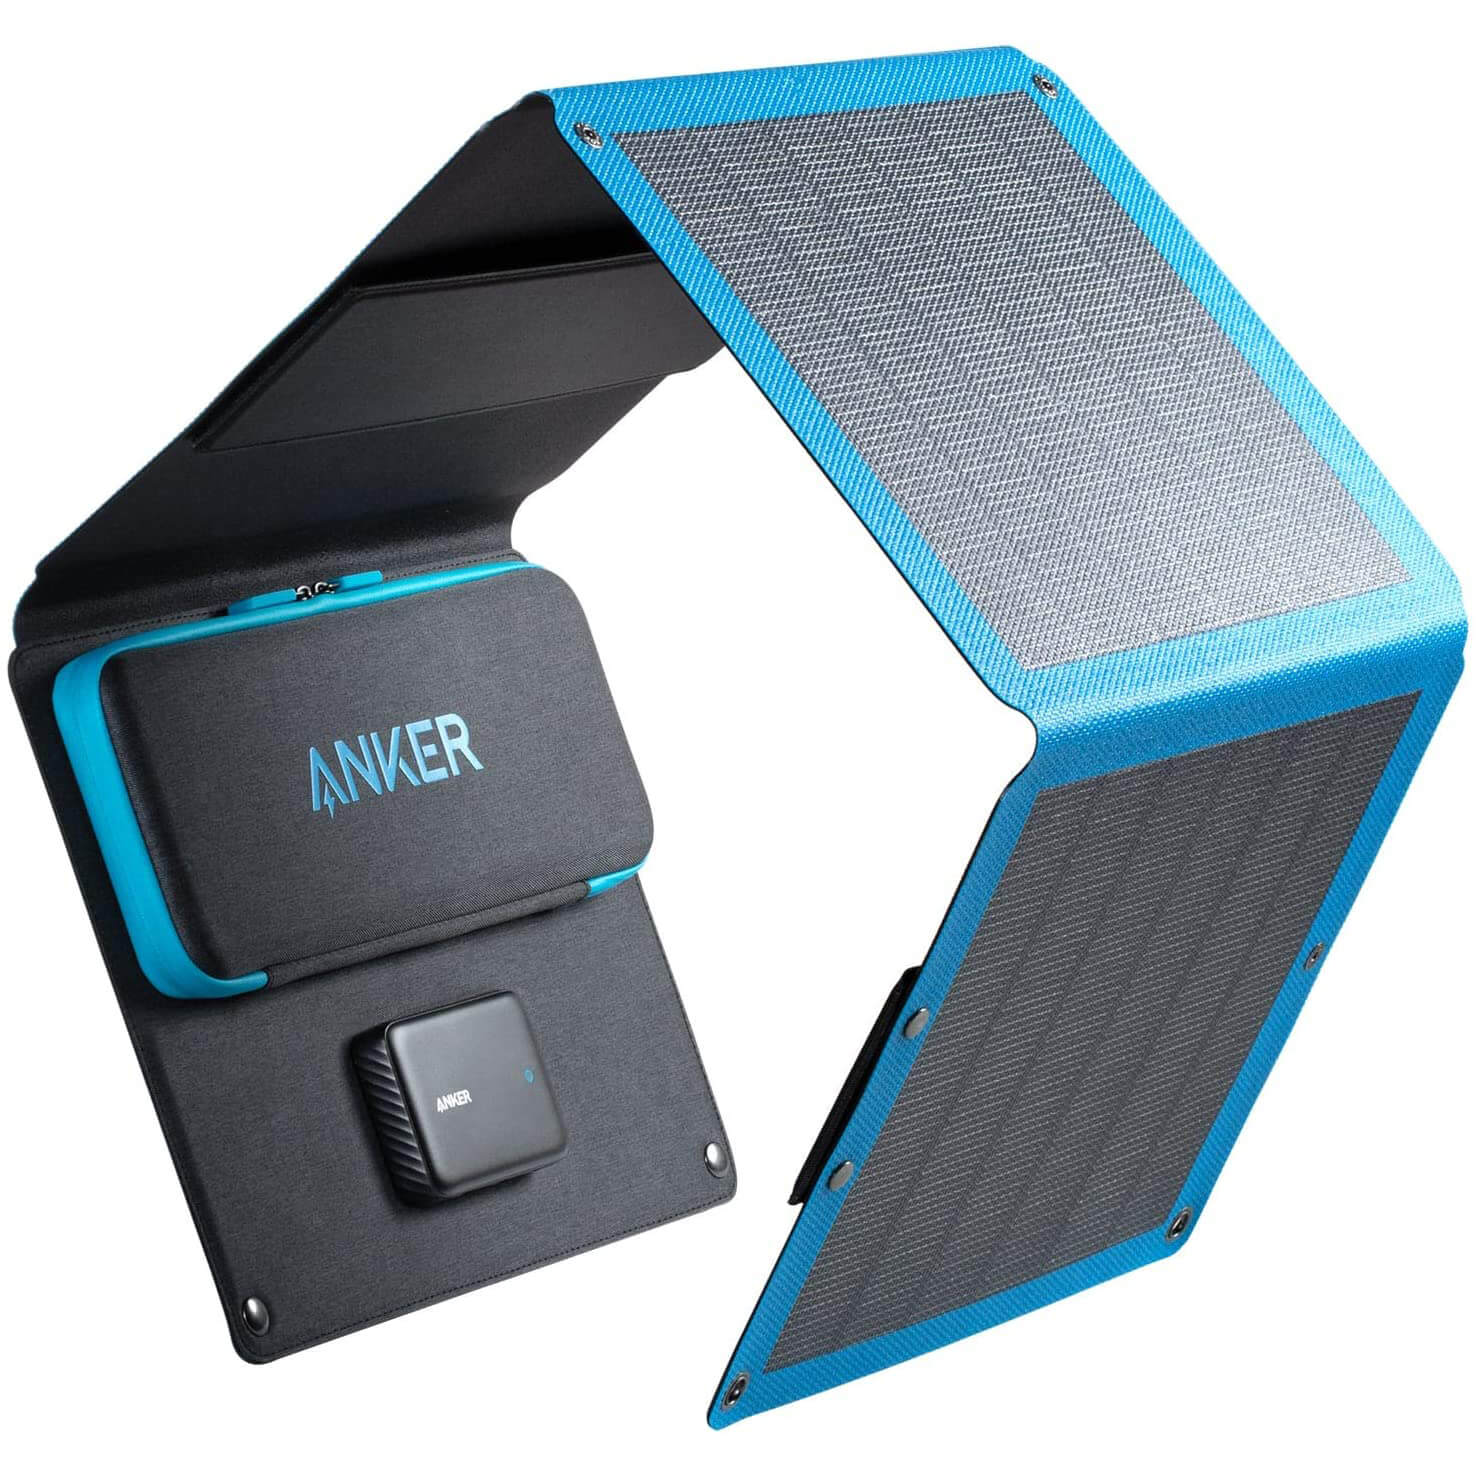 Anker 24W 3-Port USB Portable Solar Charger